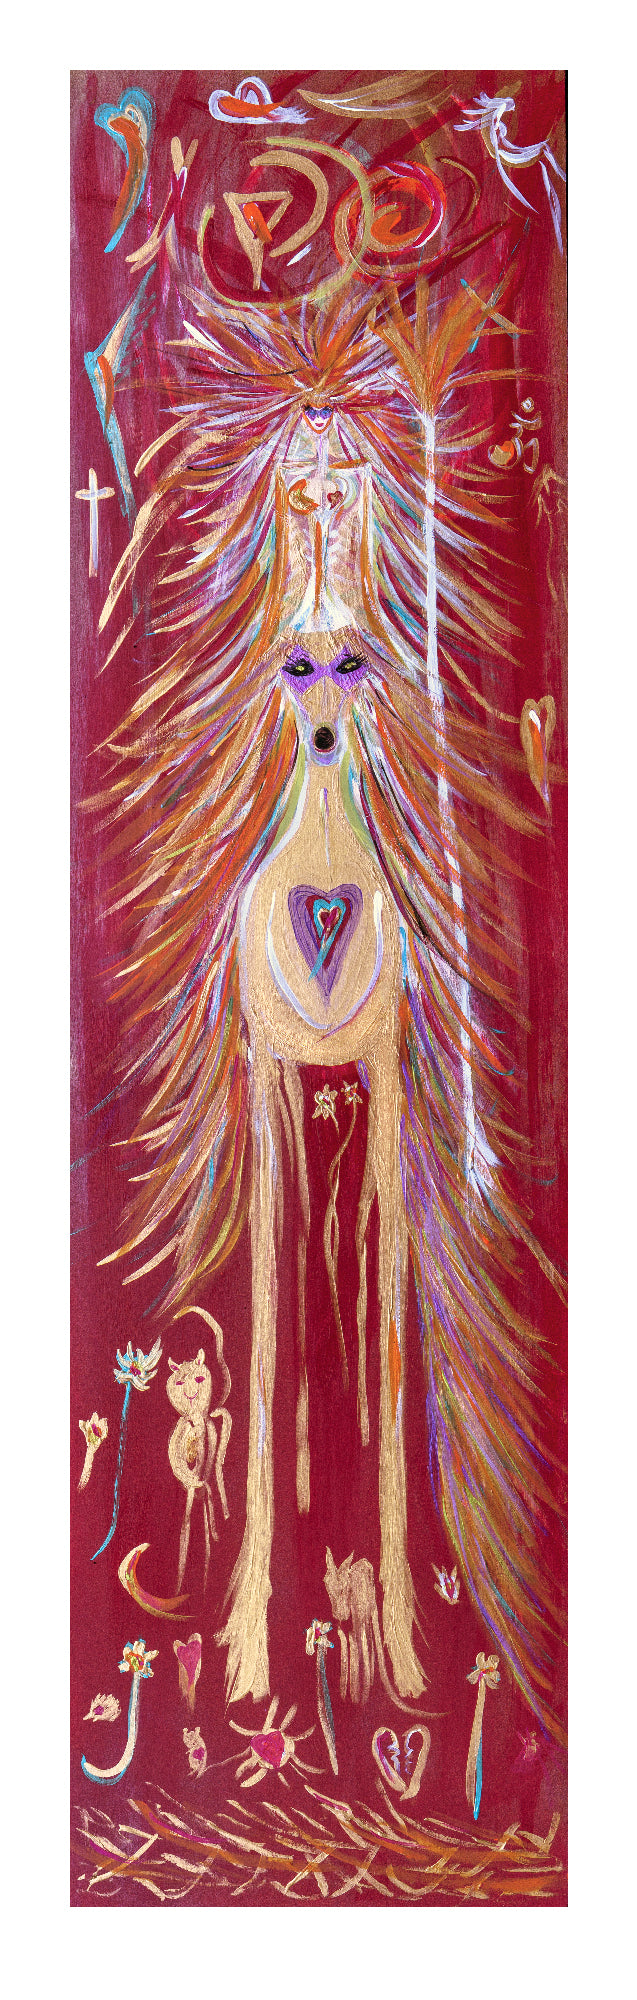 The Lady of Living - 34.0 x 109.0 cm